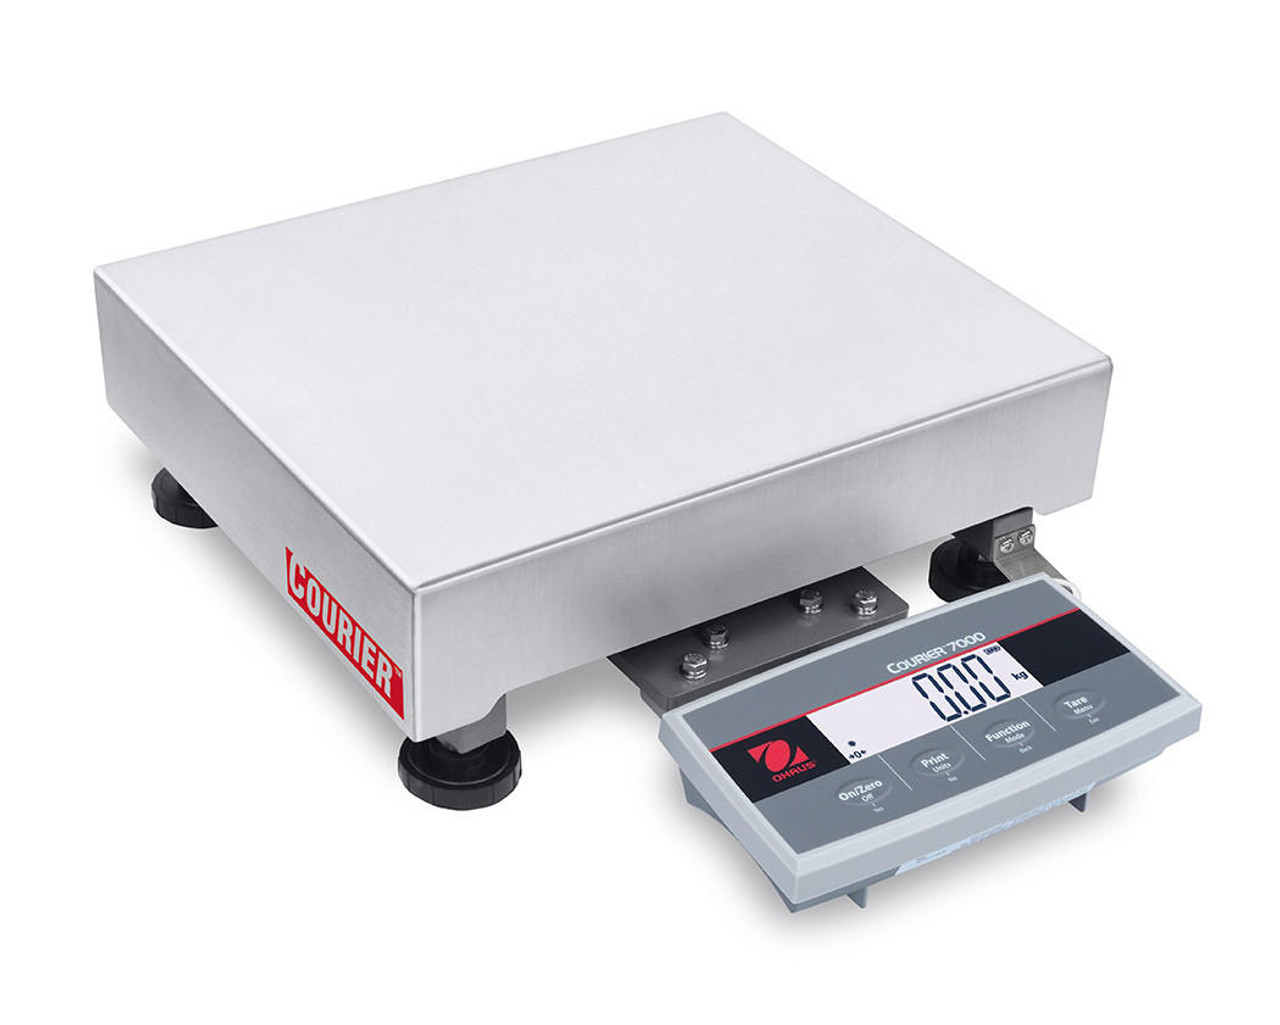 https://www.scalesplus.com/product_images/uploaded_images/ohaus-courier-7000-i-c71m15r-shipping-scale-30-lb-x-0.01-lb-ntep-22684.jpg